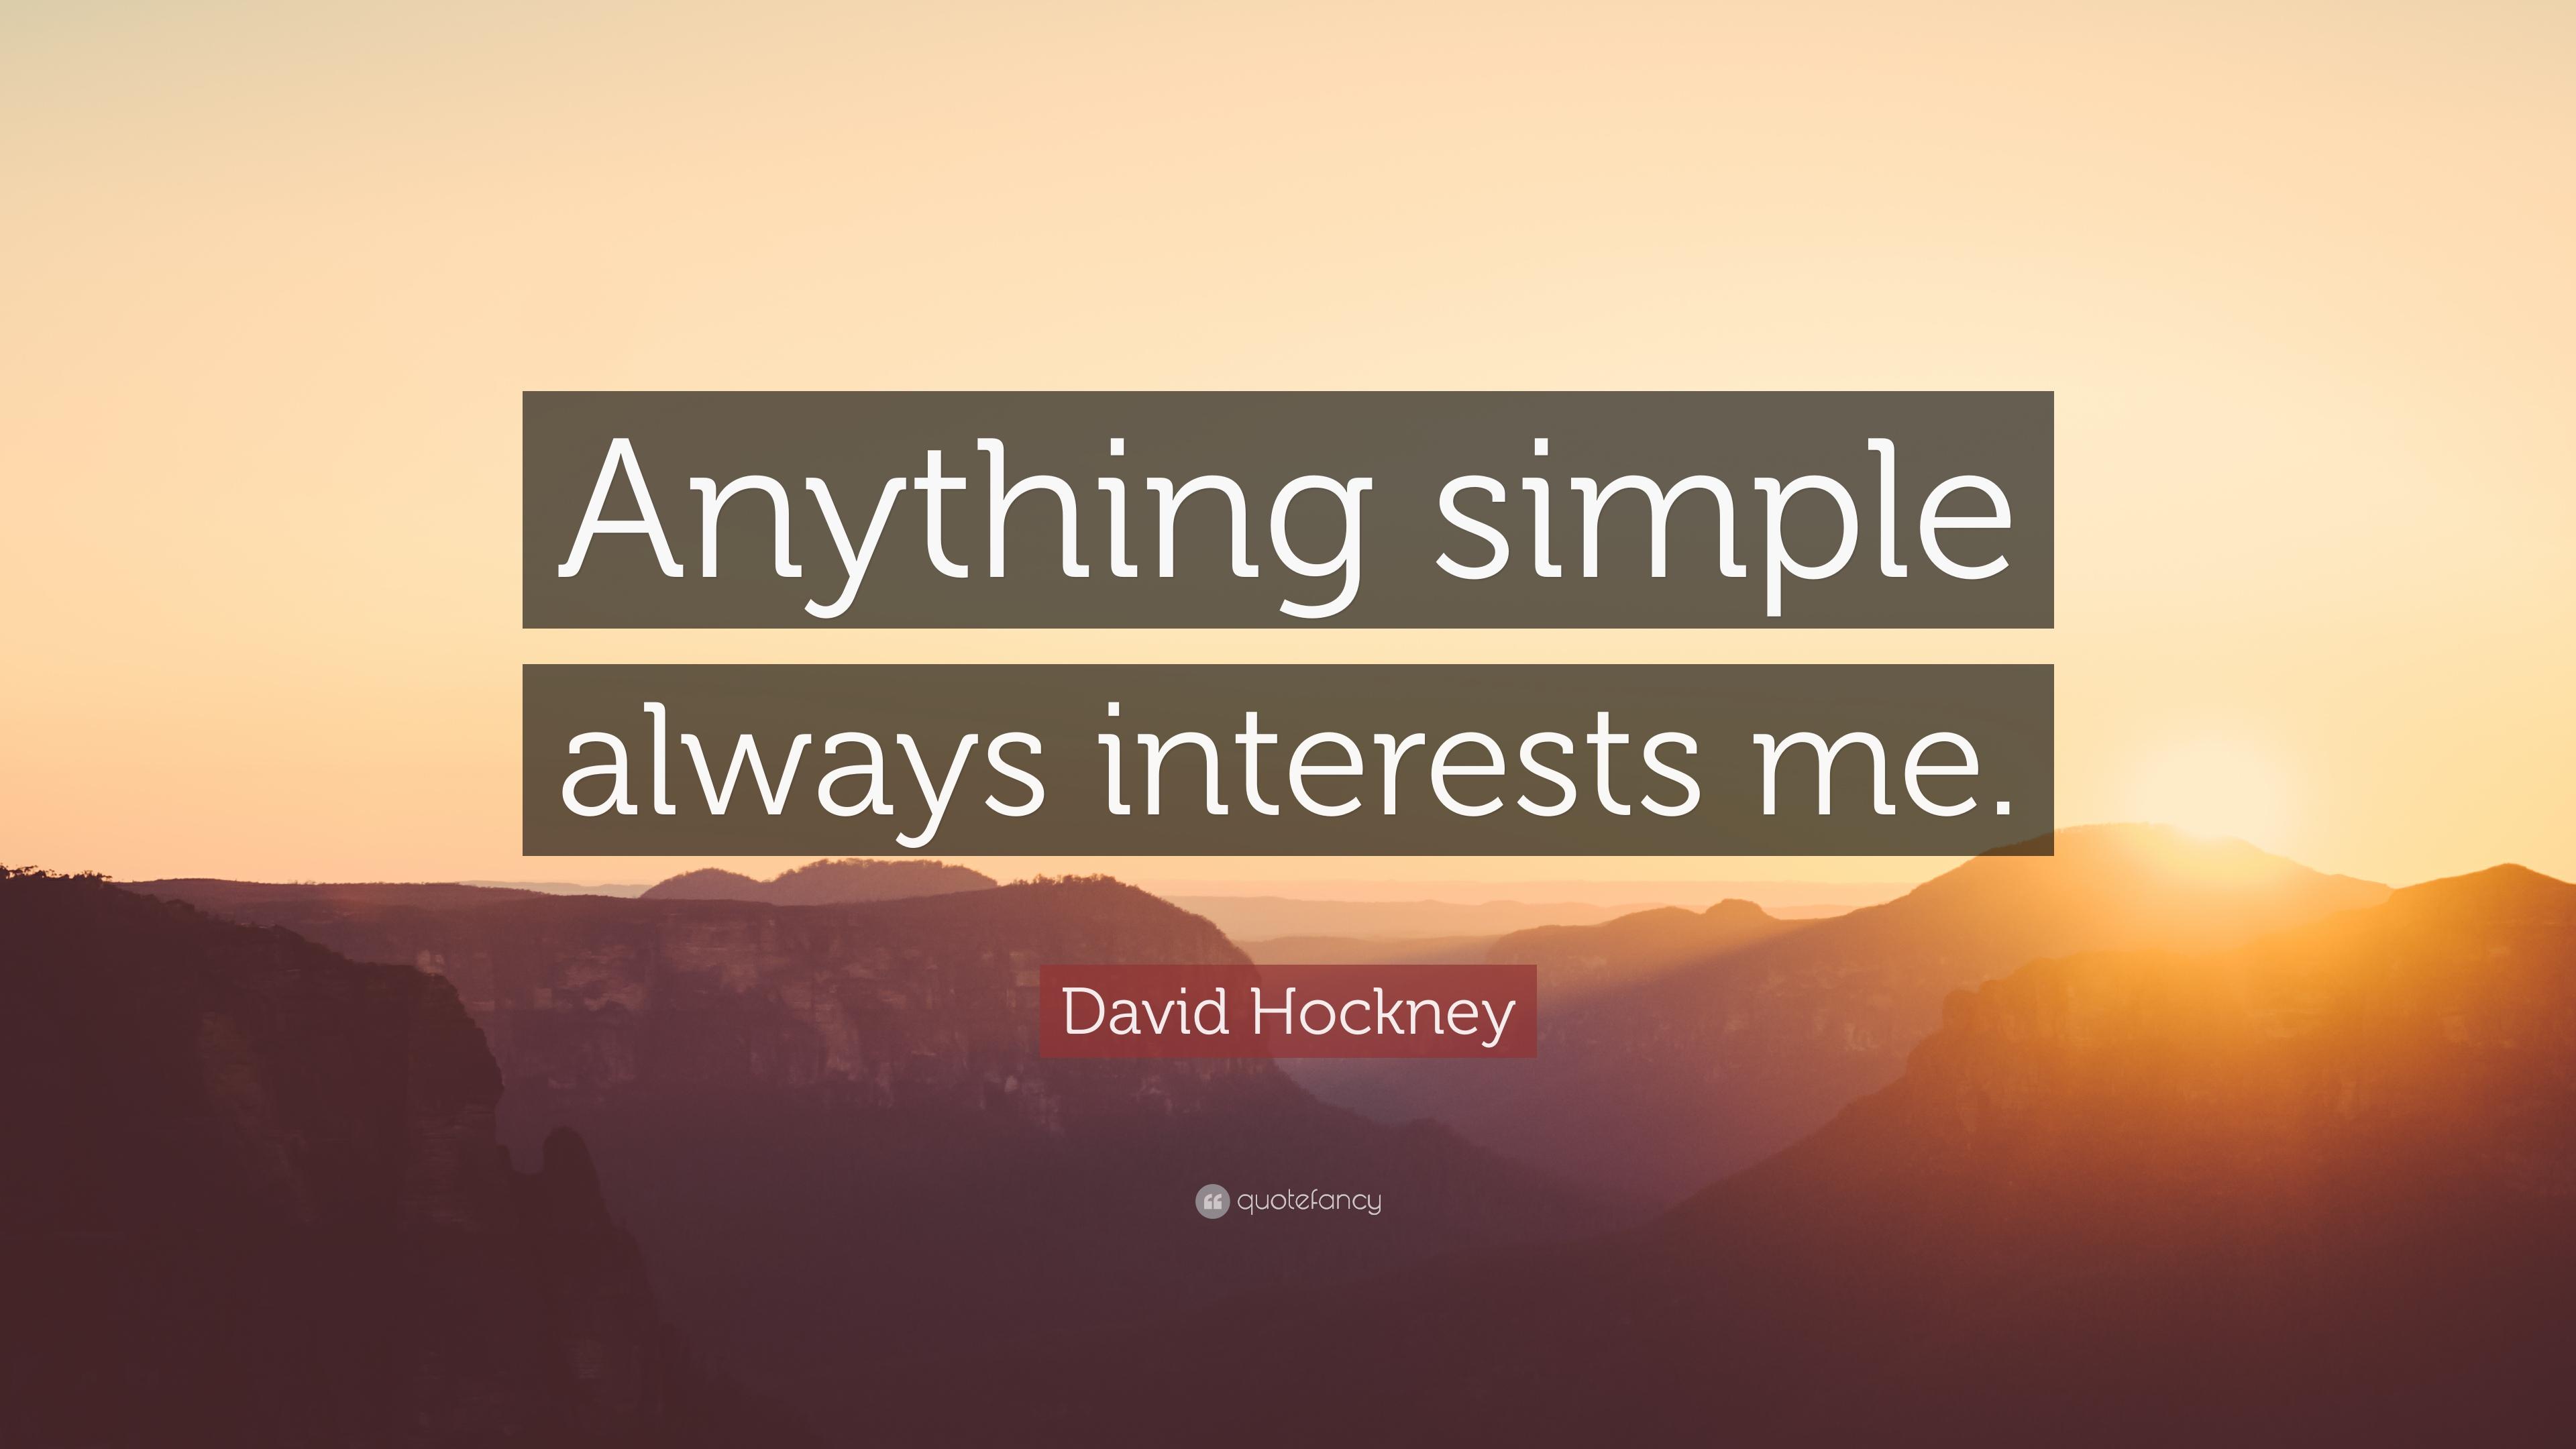 David Hockney Quote: “Anything simple always interests me.” 7